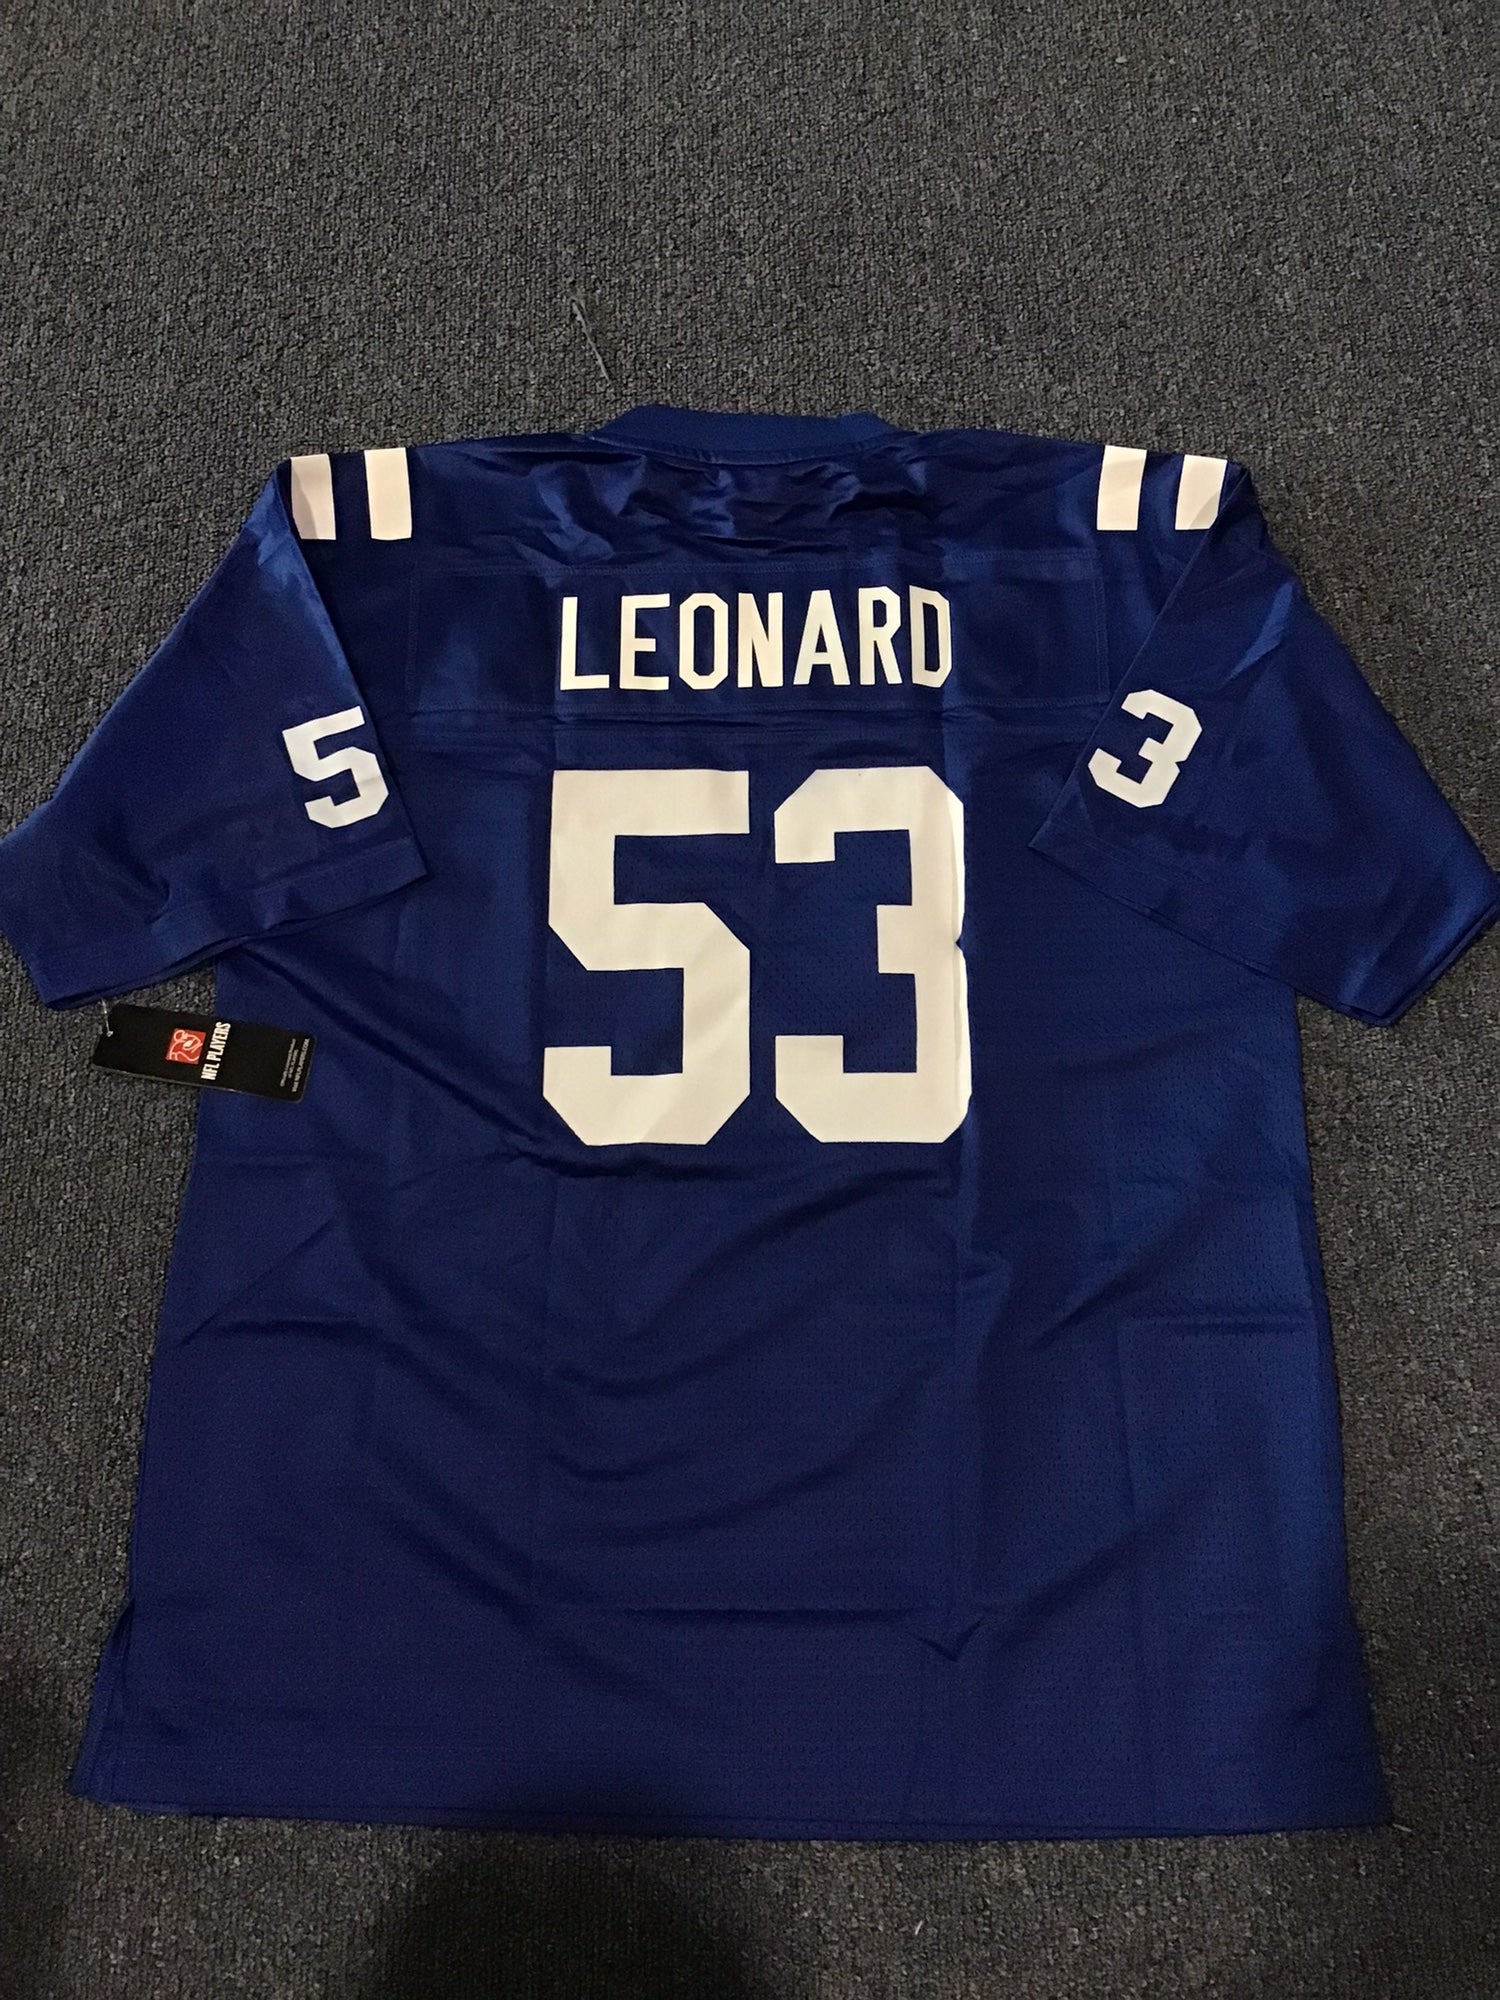 Official Indianapolis Colts Shaquille Leonard Jerseys, Colts Shaquille Leonard  Jersey, Jerseys